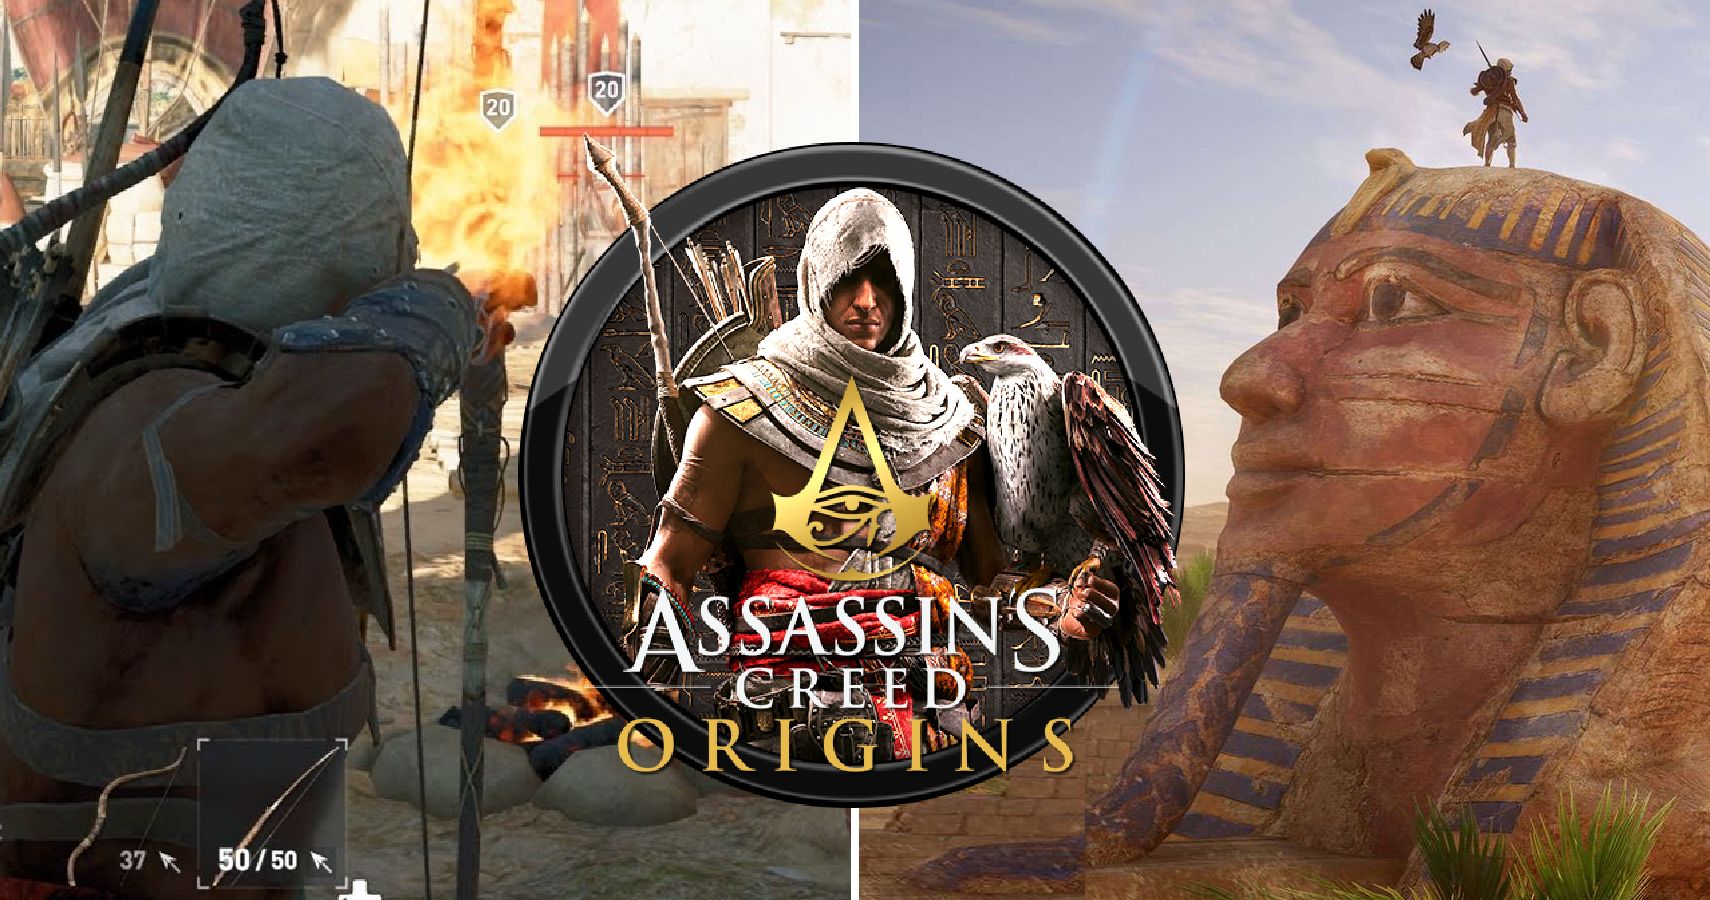 Assassins Creed Origins - Review: Assassin's Creed Origins - The Enemy